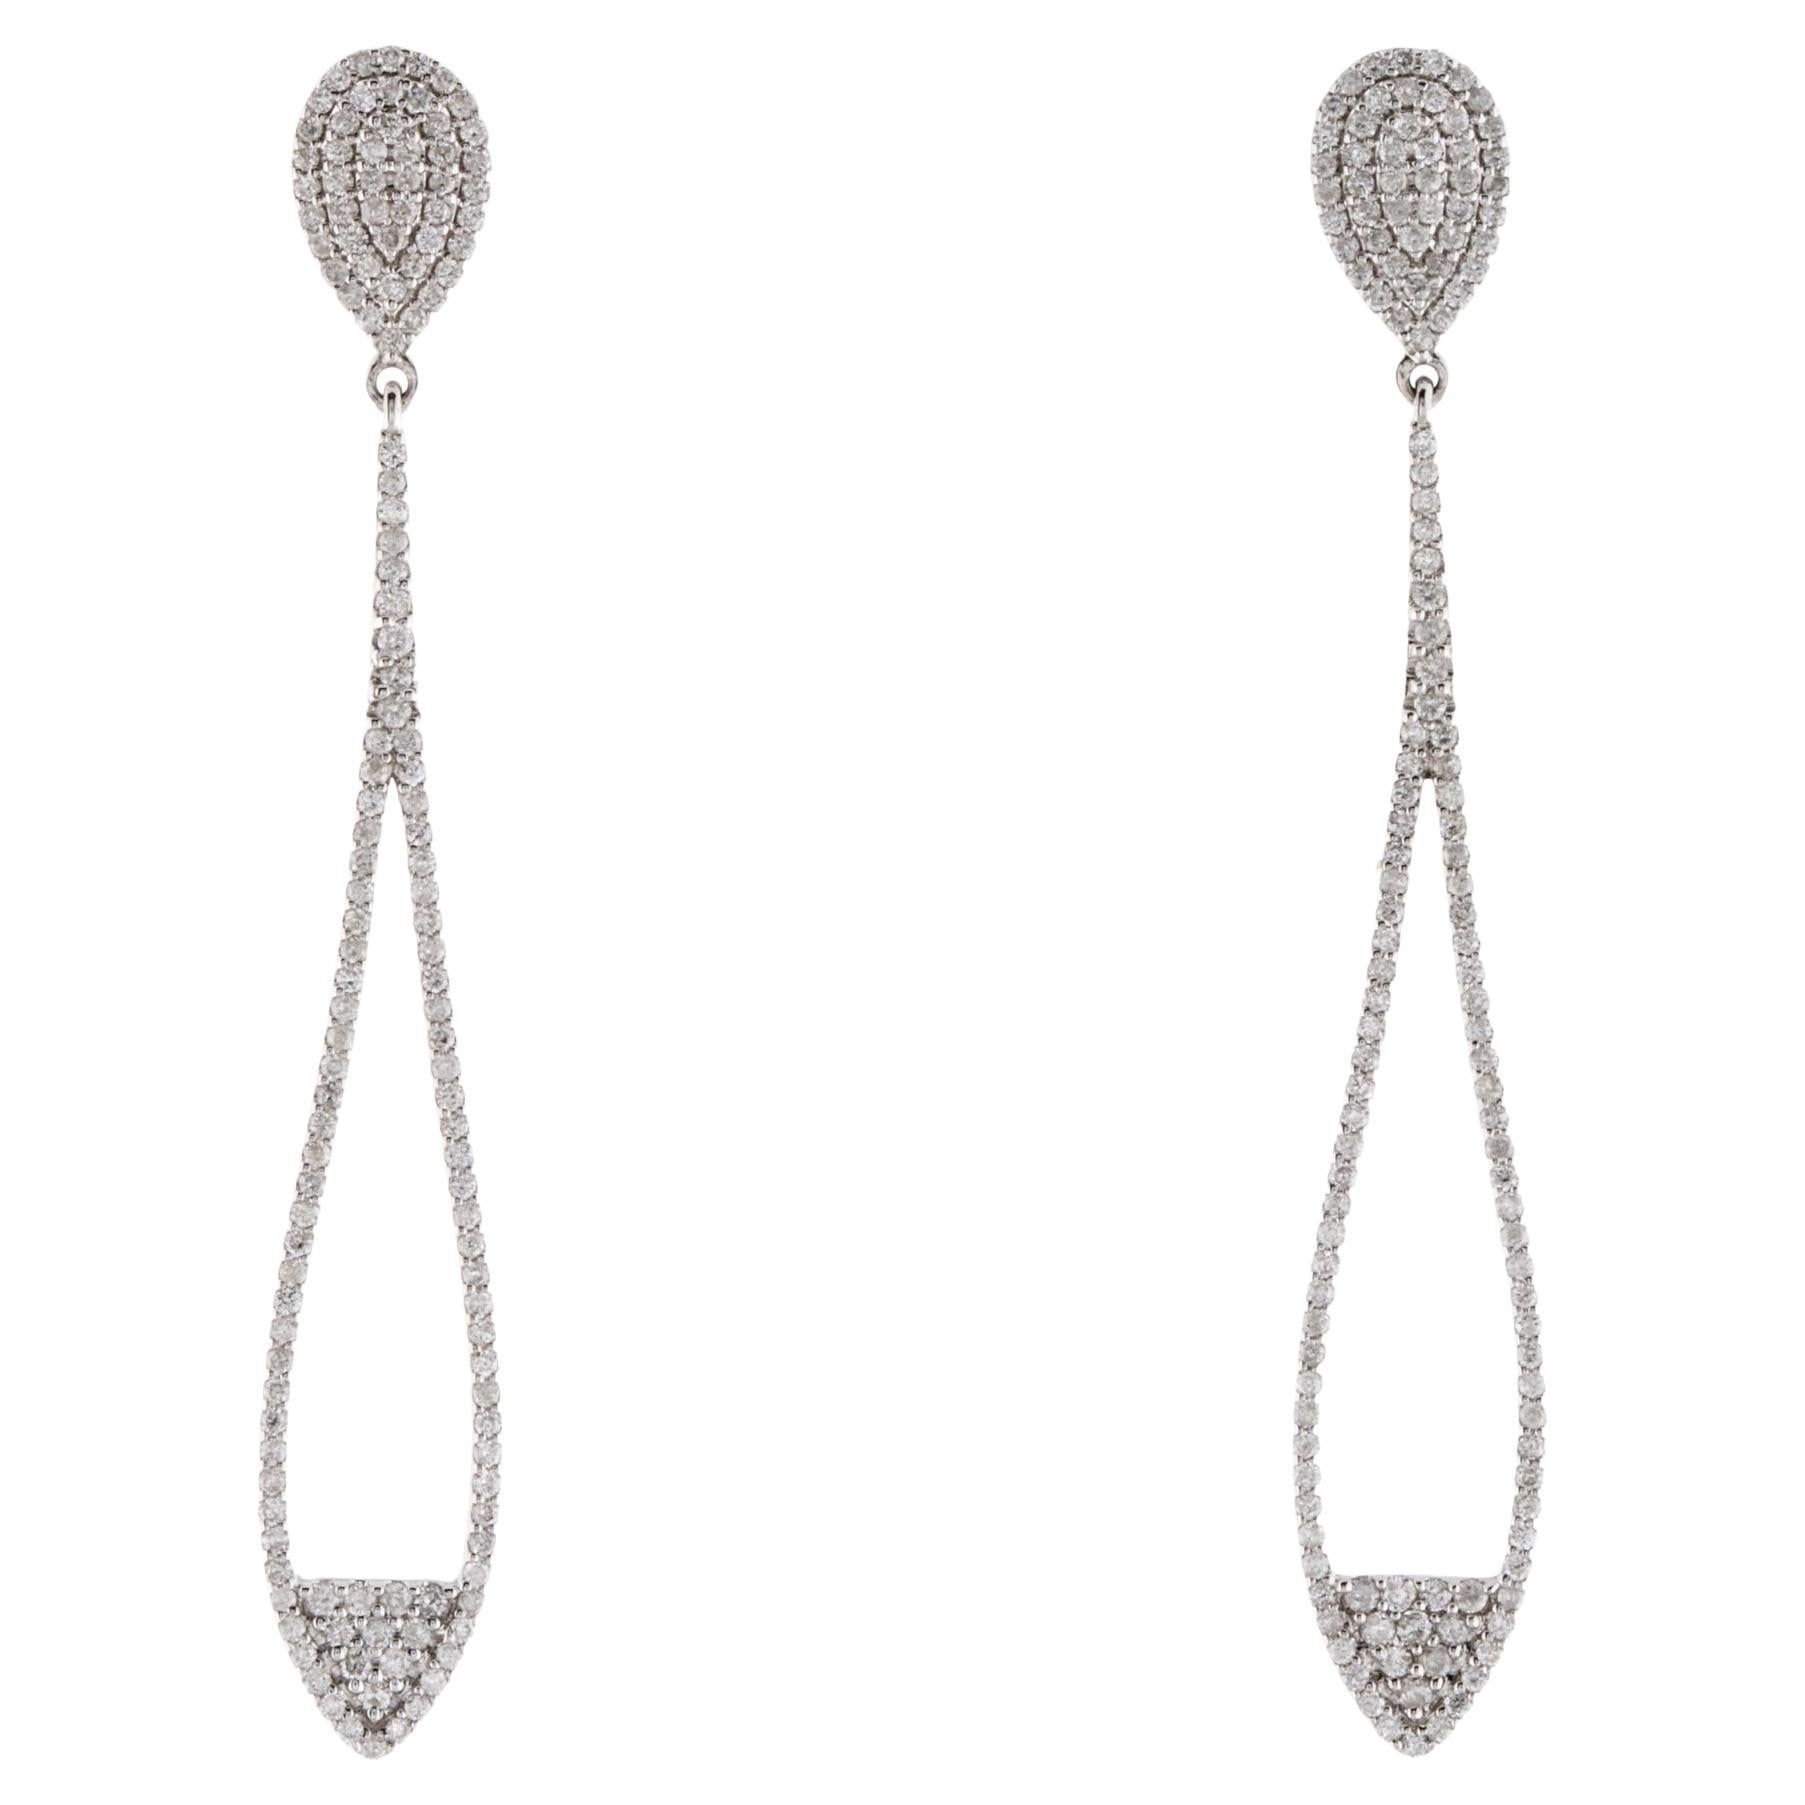 14K White Gold Diamond Drop Earrings - 0.55ct Round Brilliant, Near Colorless For Sale